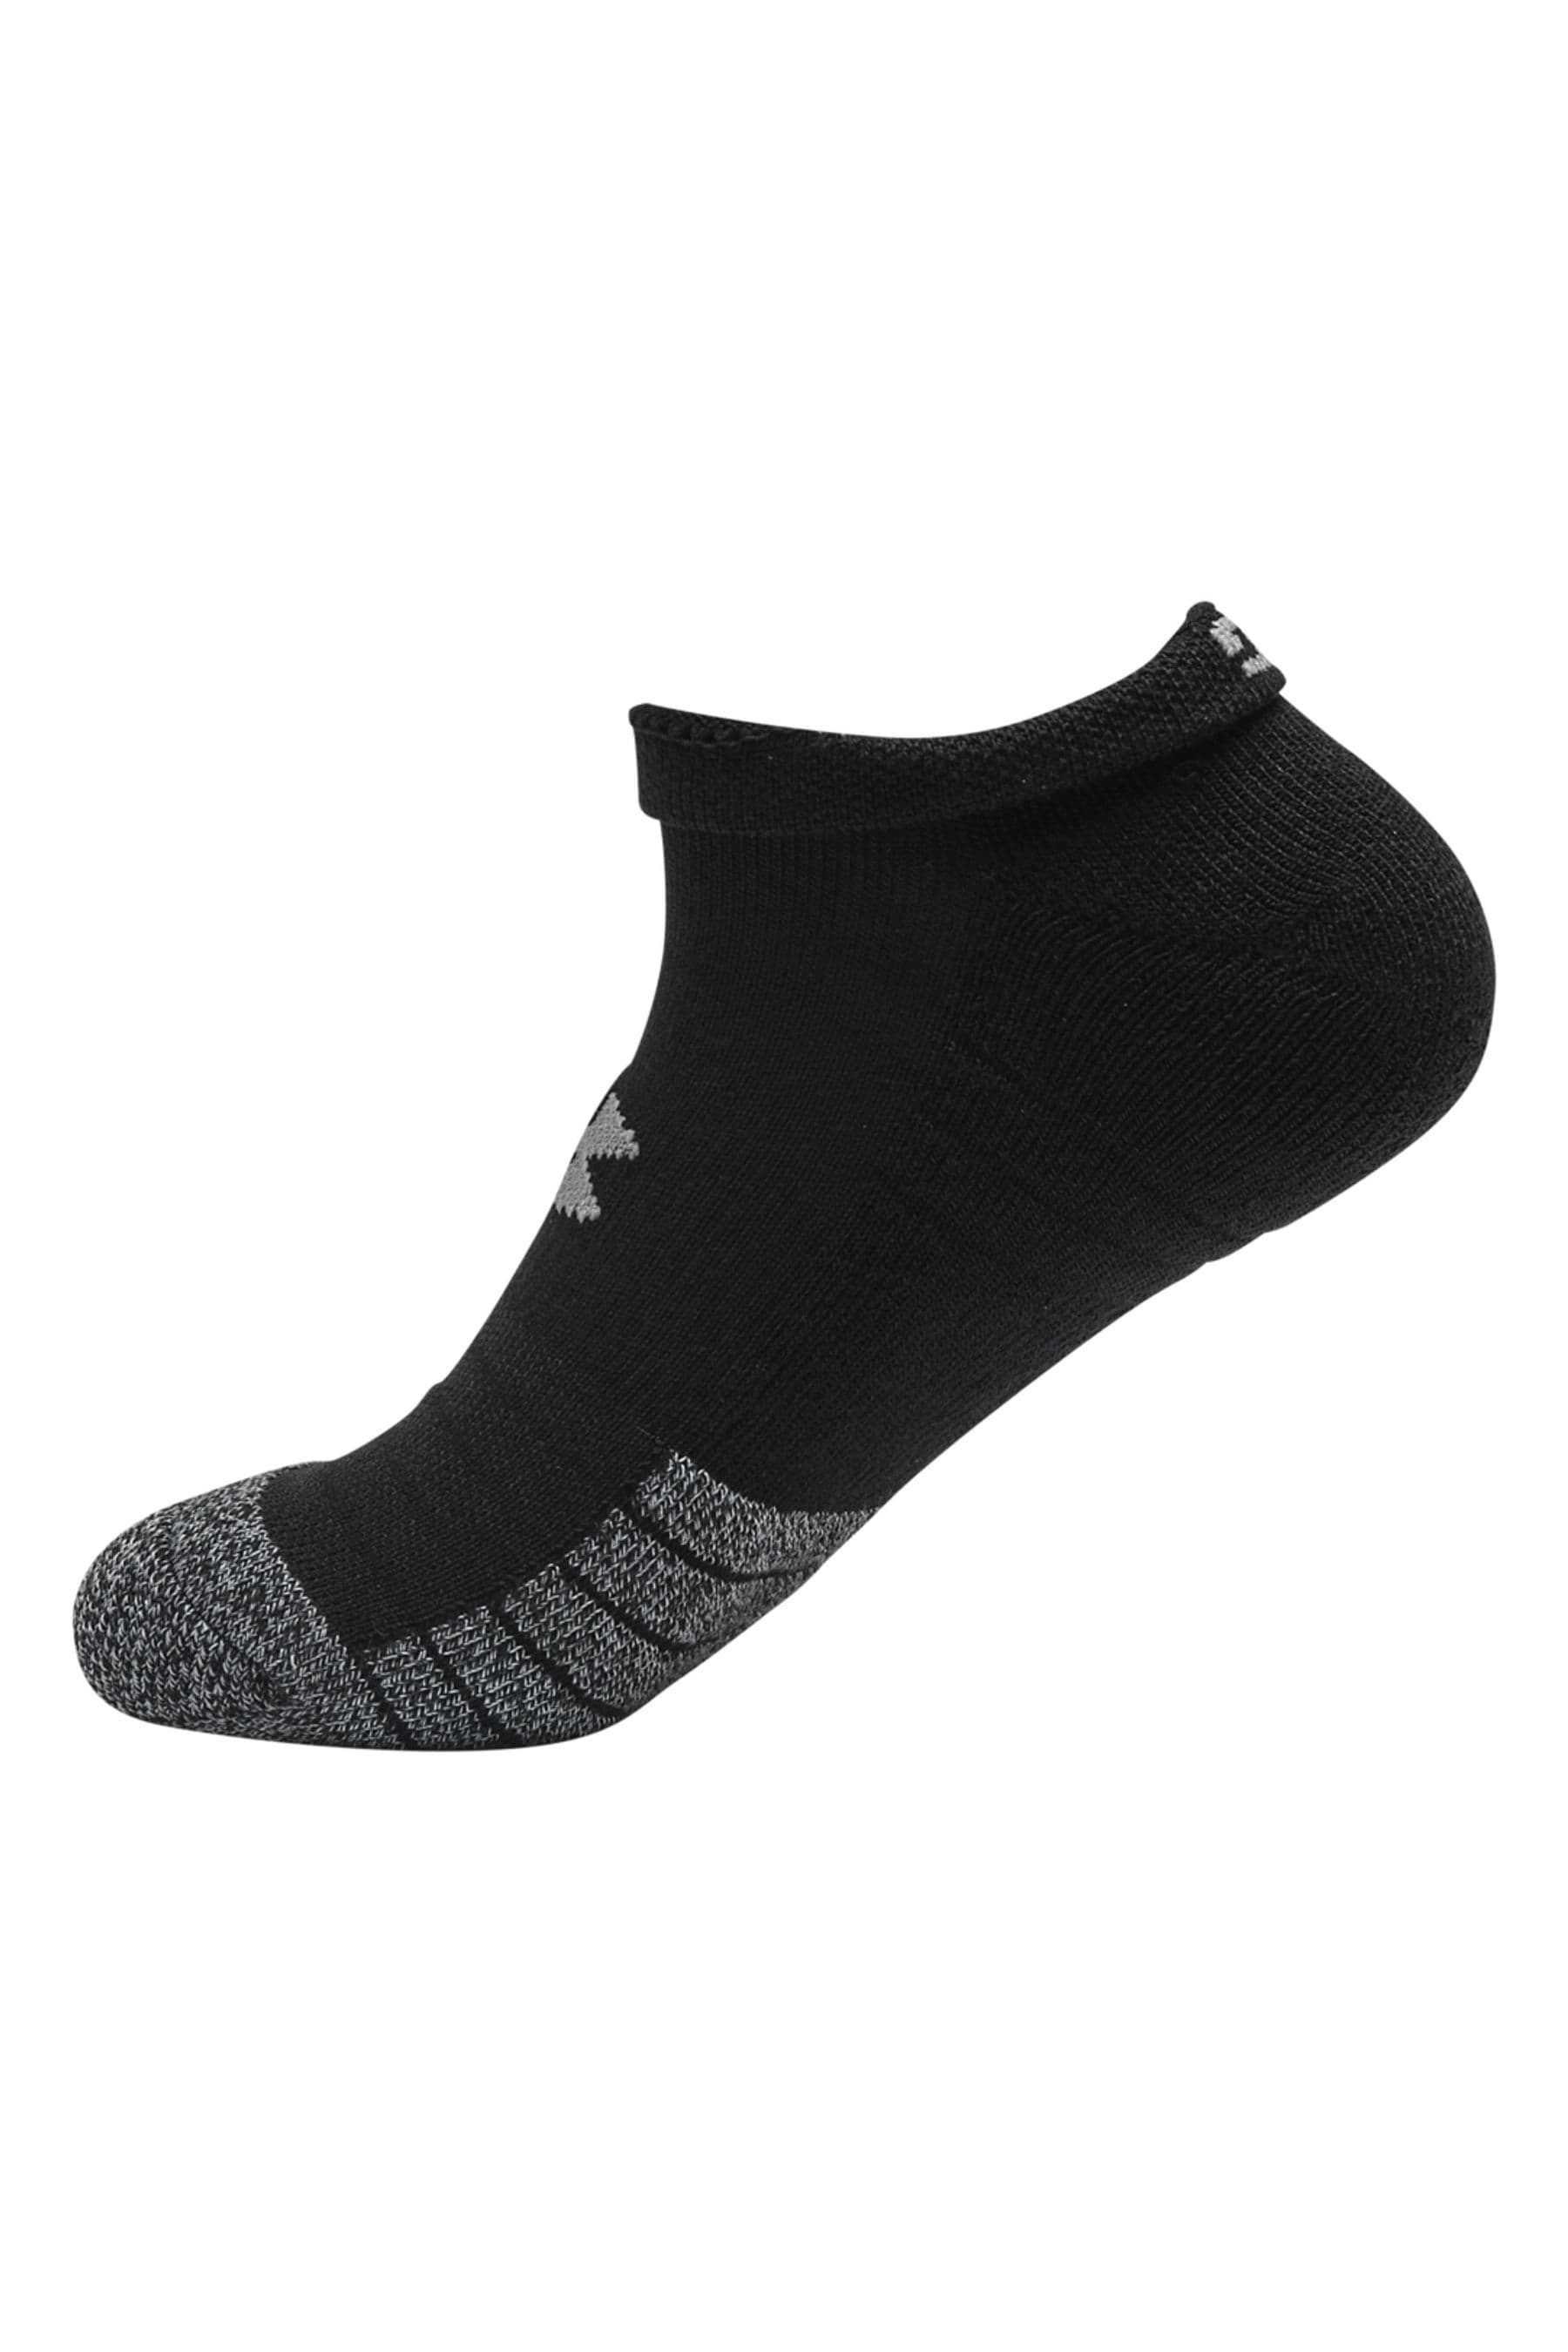 Buy Under Armour No Show Socks Three Pack from the Next UK online shop